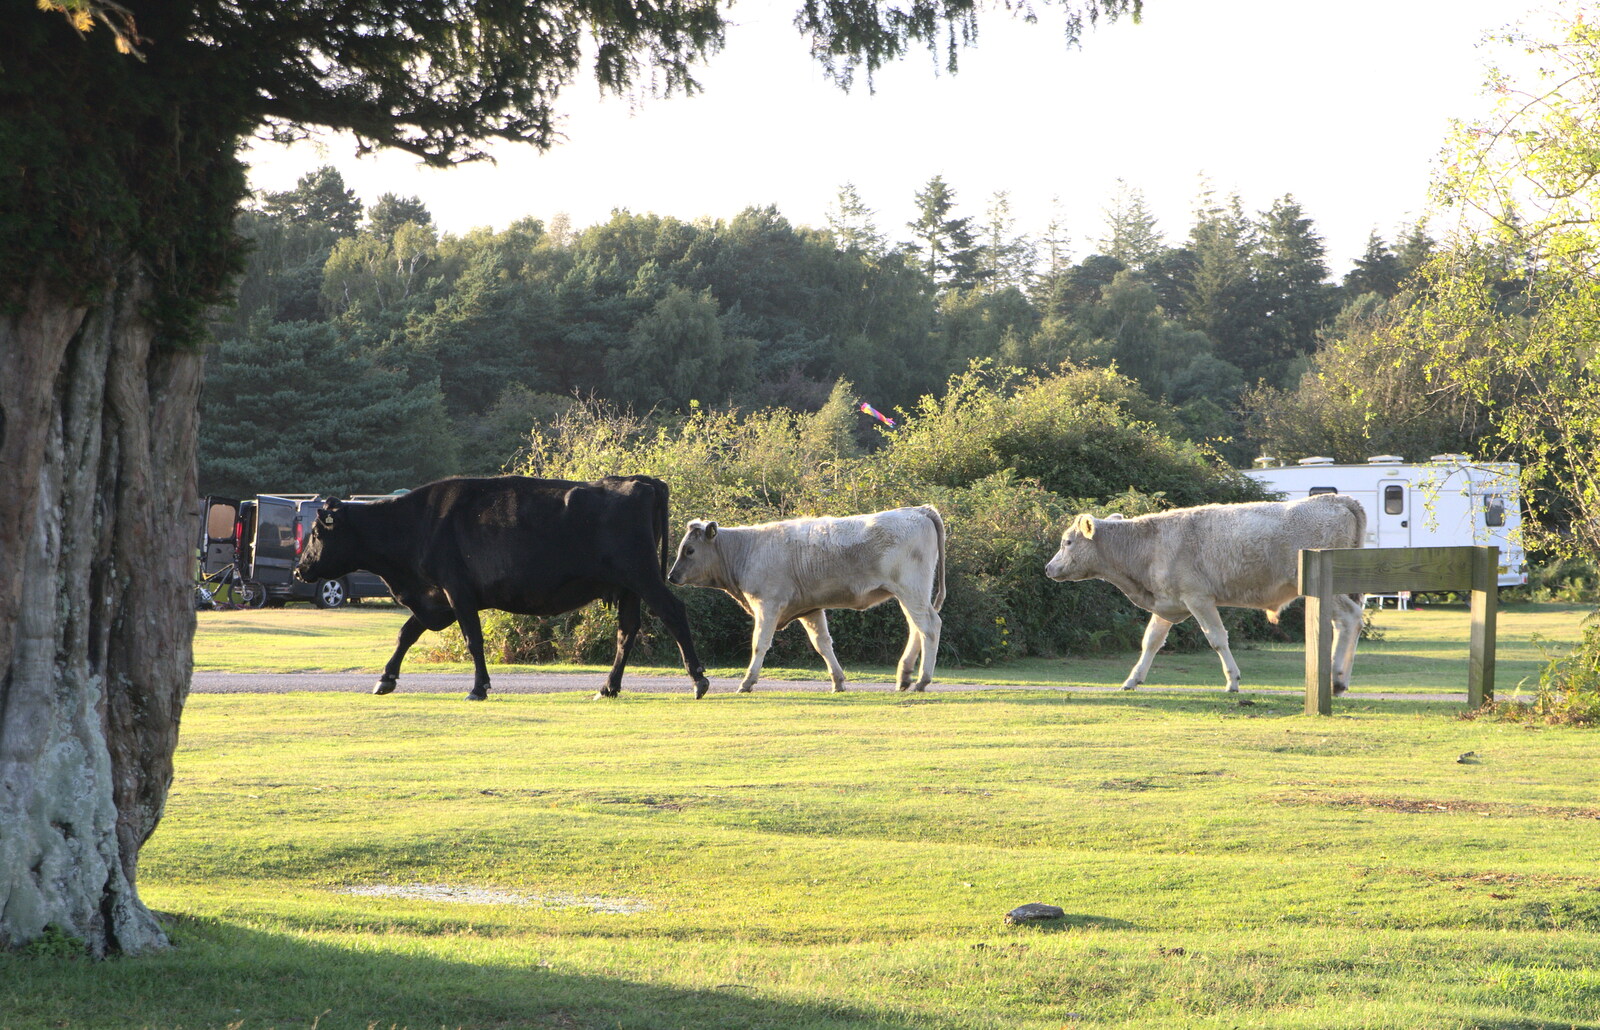 Some cows march around from Camping at Roundhills, Brockenhurst, New Forest, Hampshire - 29th August 2015